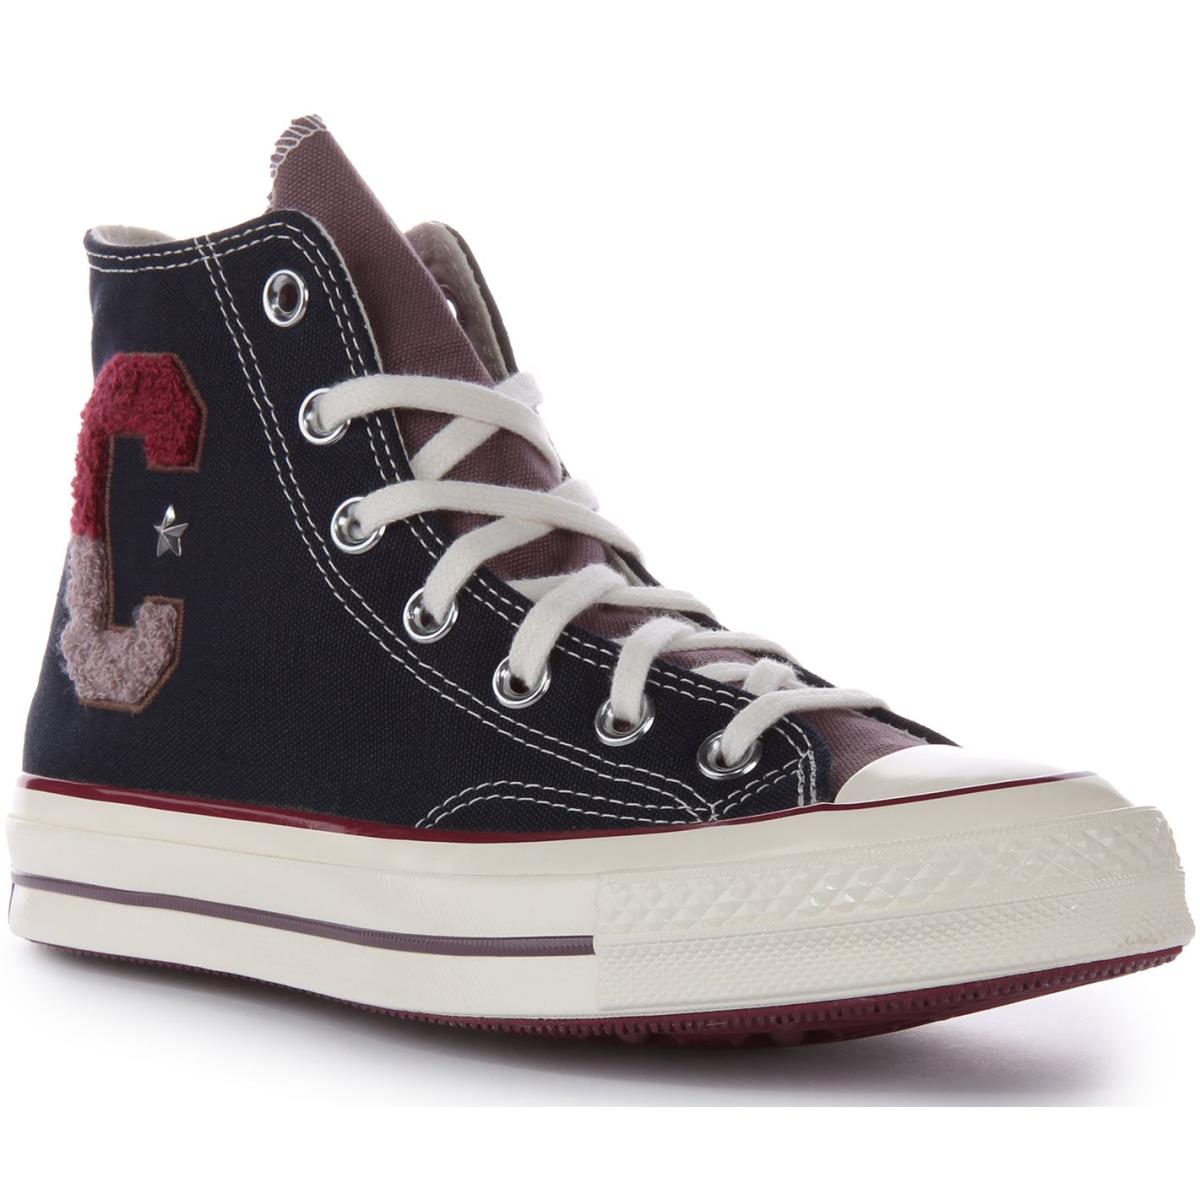 Converse A07980C Chuck 70 Hi Varsity Letter C Canvas Shoe Navy Red US 6 - 12 NAVY RED